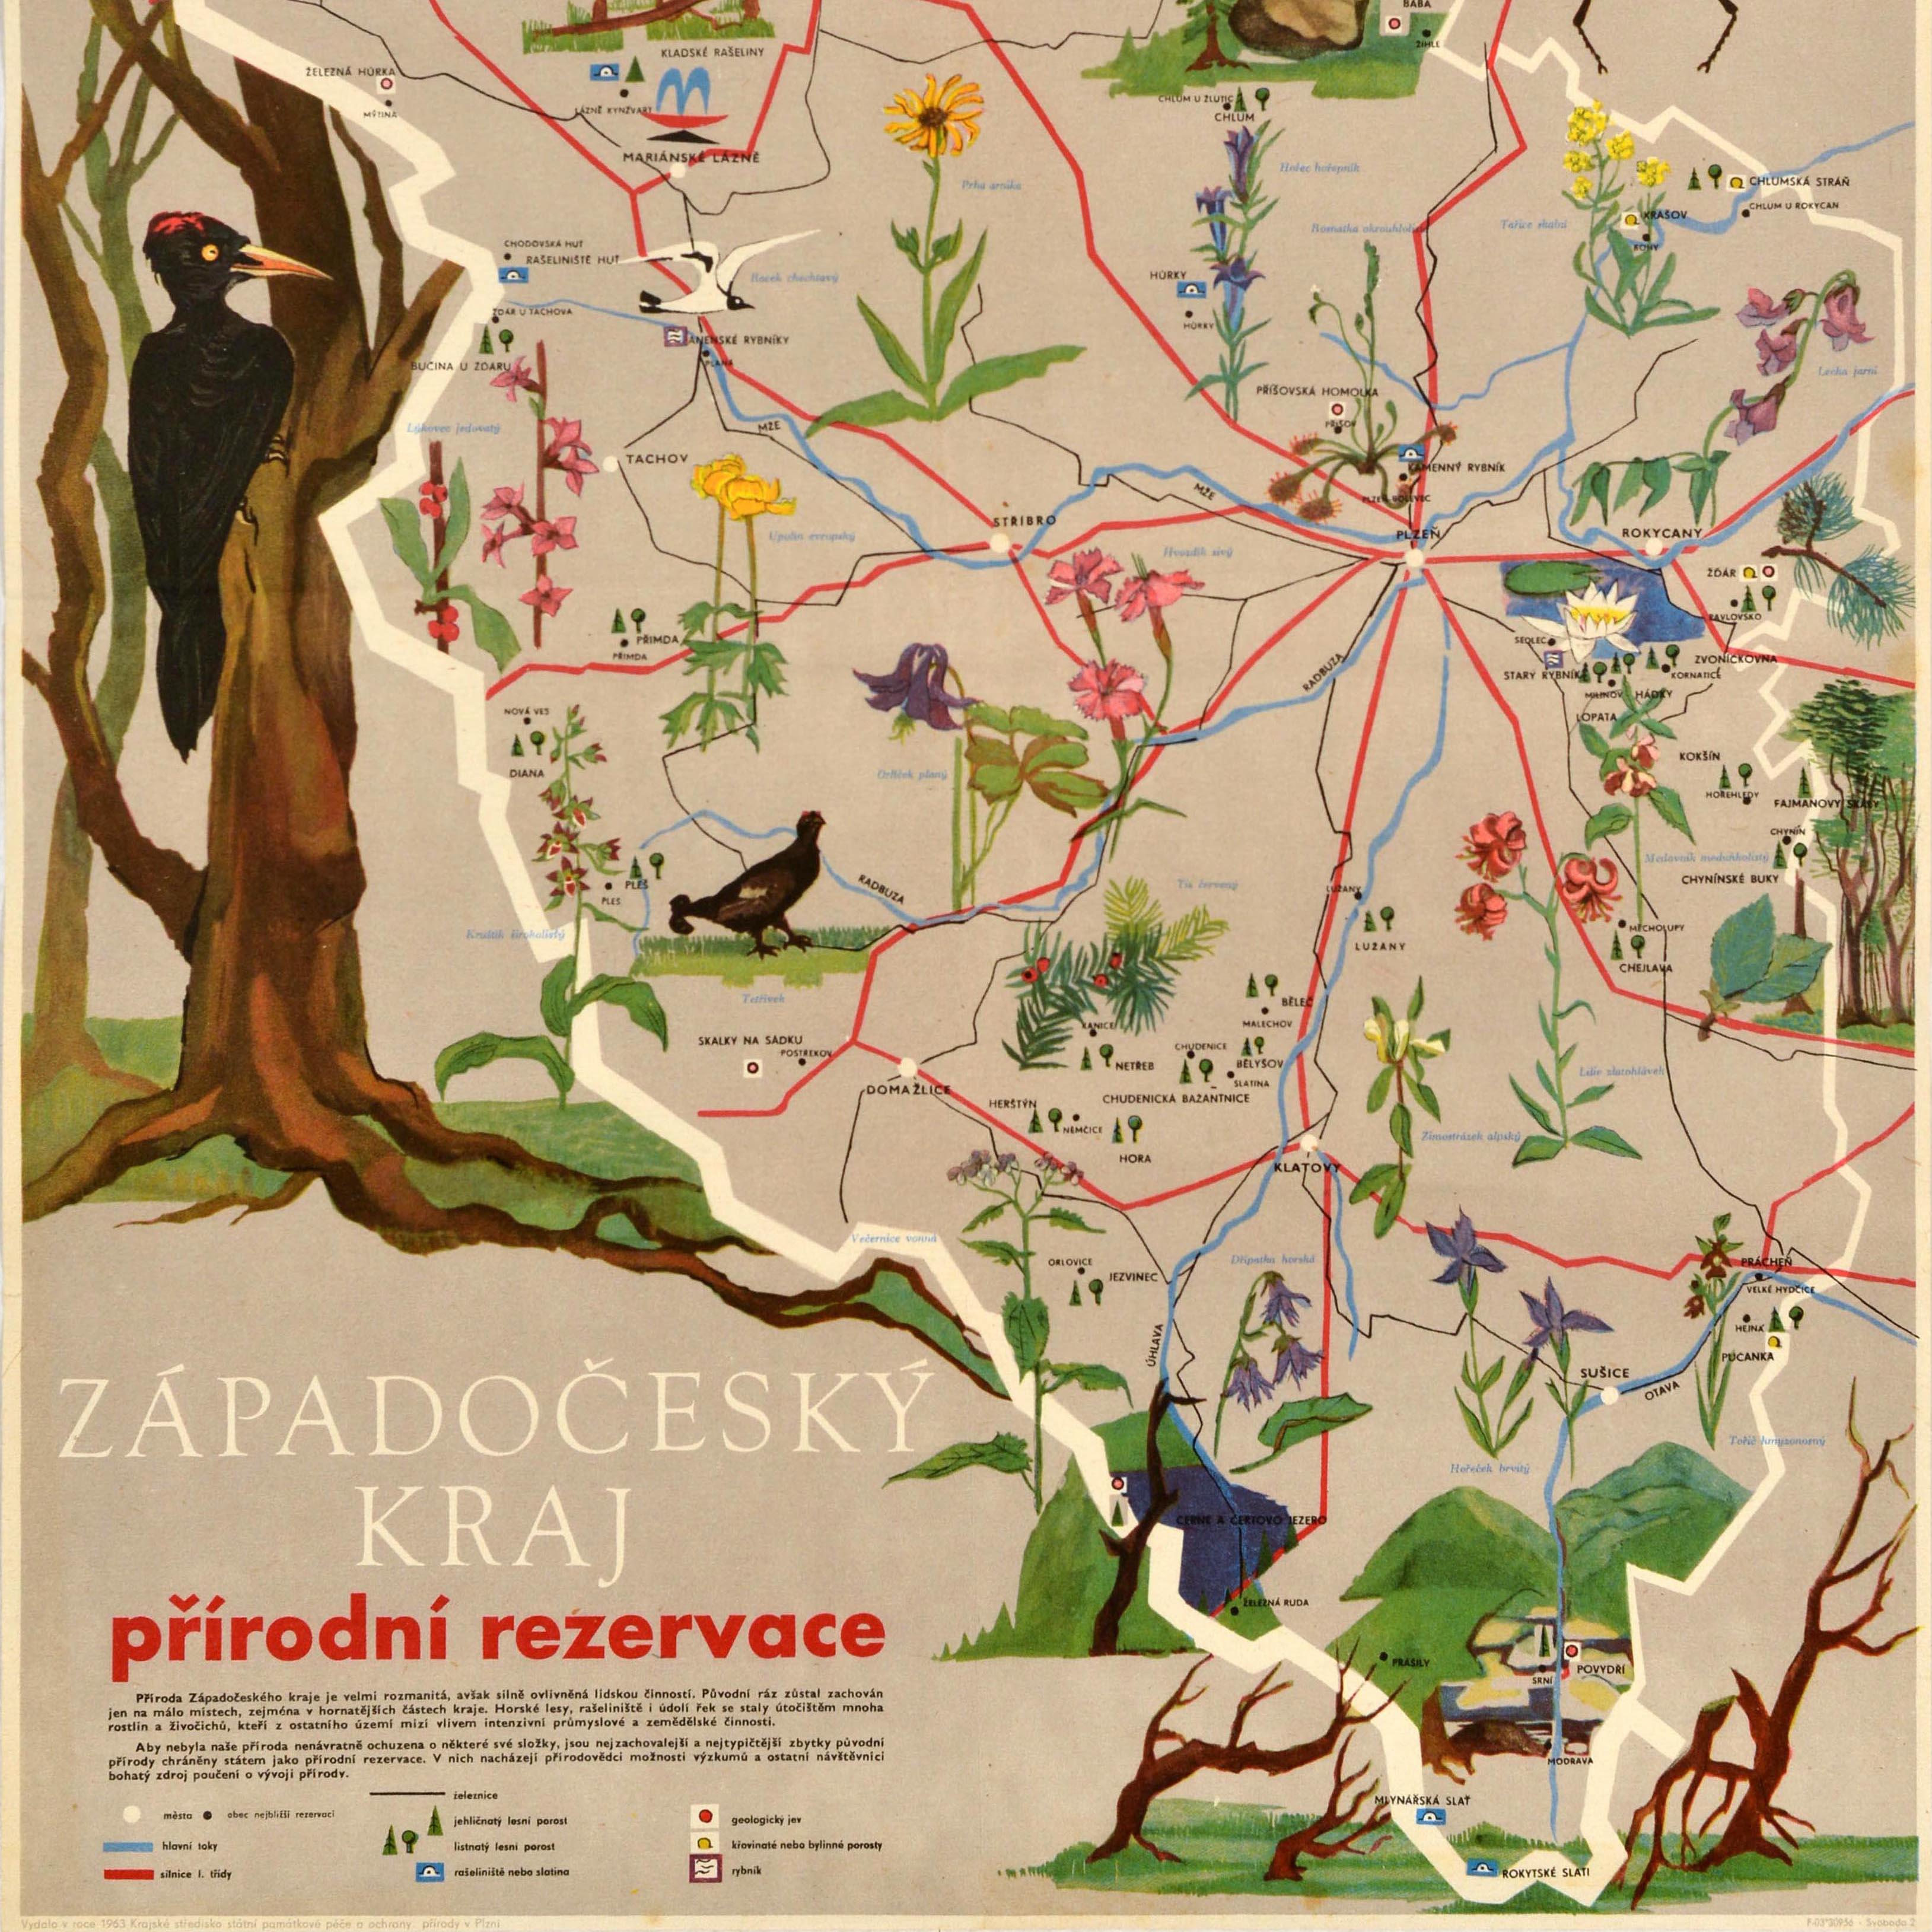 Original vintage travel poster for the West Bohemian Region Nature Reserve / Zapadocesky Kraj Prirodni Rezervace featuring a pictorial map of the area showing various flora and fauna species including different birds and insects, colourful flowers